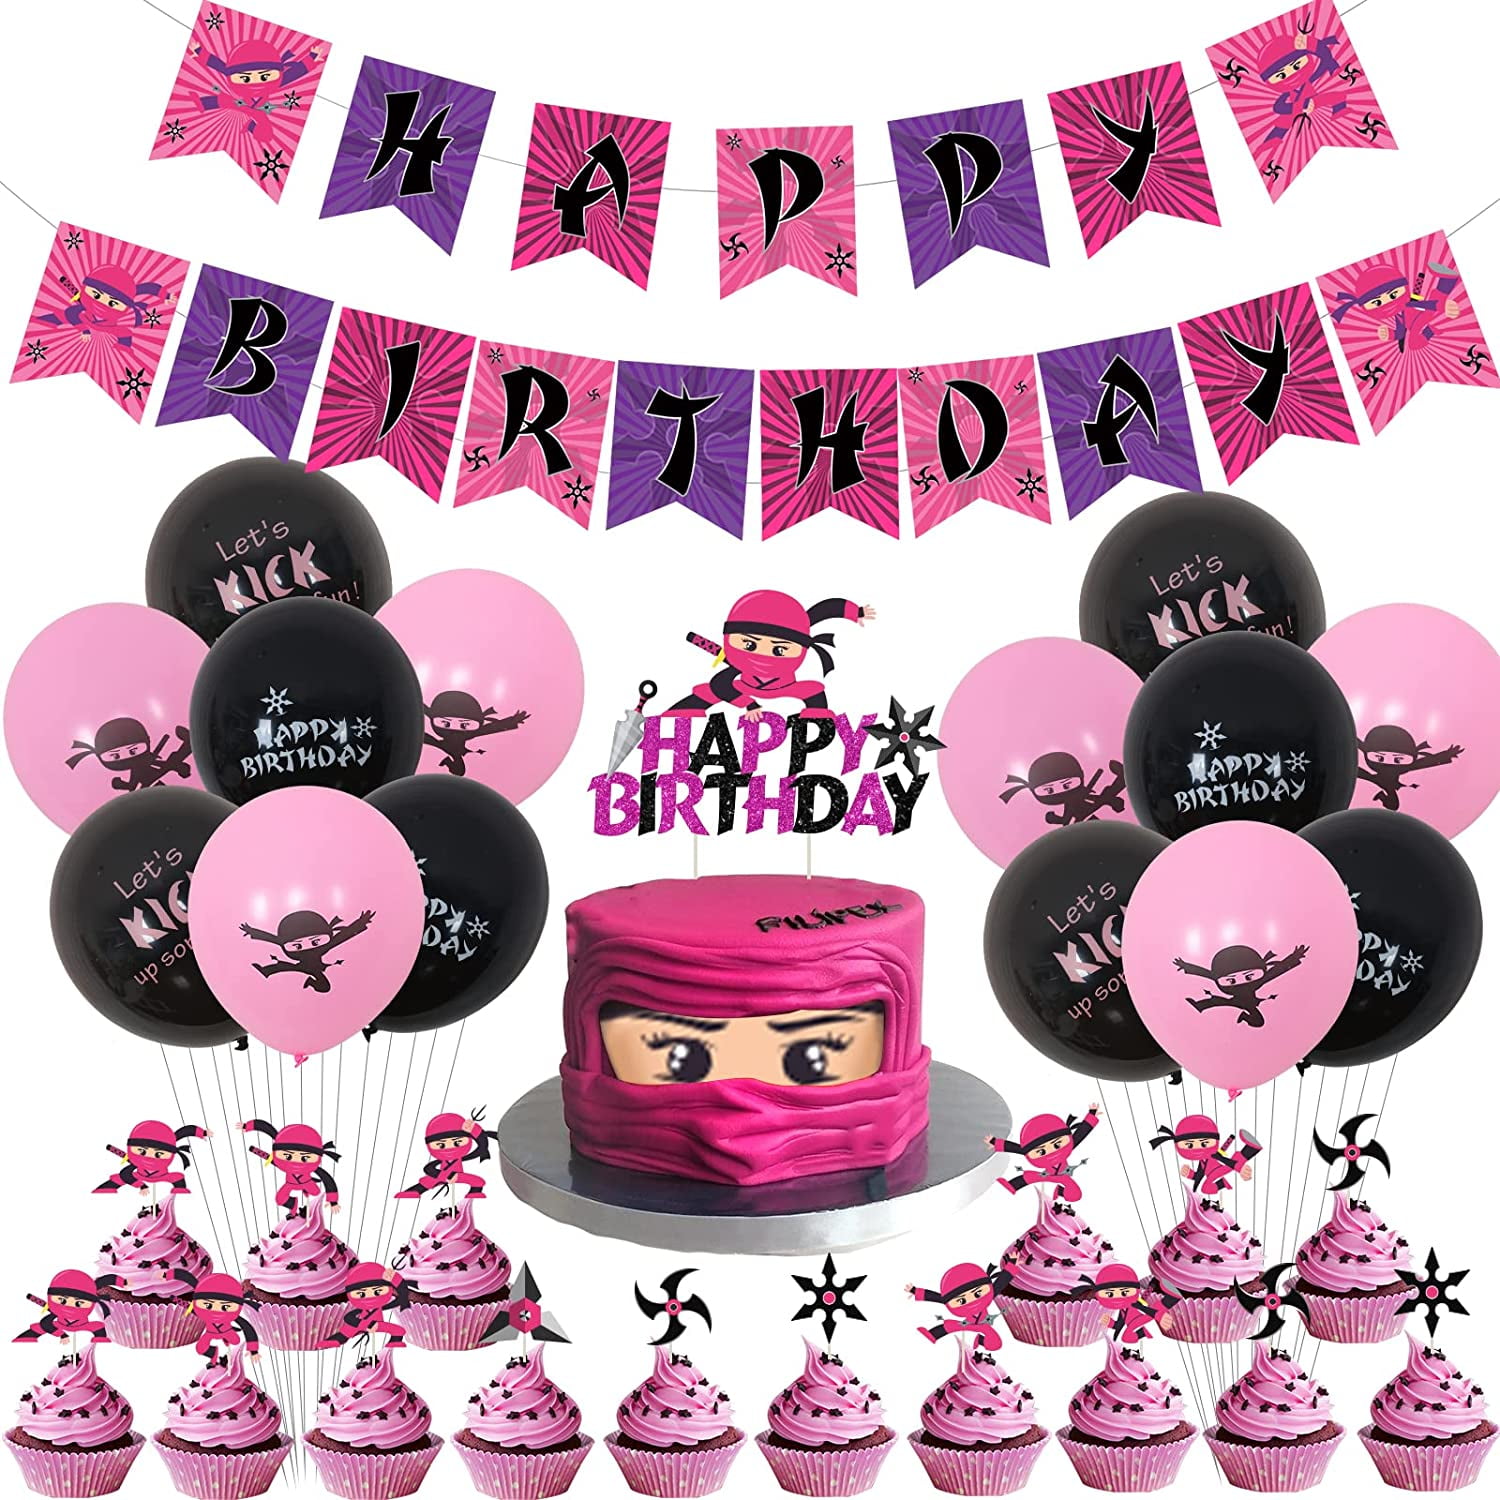 Cartoon Anime 8th Birthday Cake Topper-Ideal for a Cartoon Anime Themed  Party or a Boy or Girl's Birthday Party Decoration